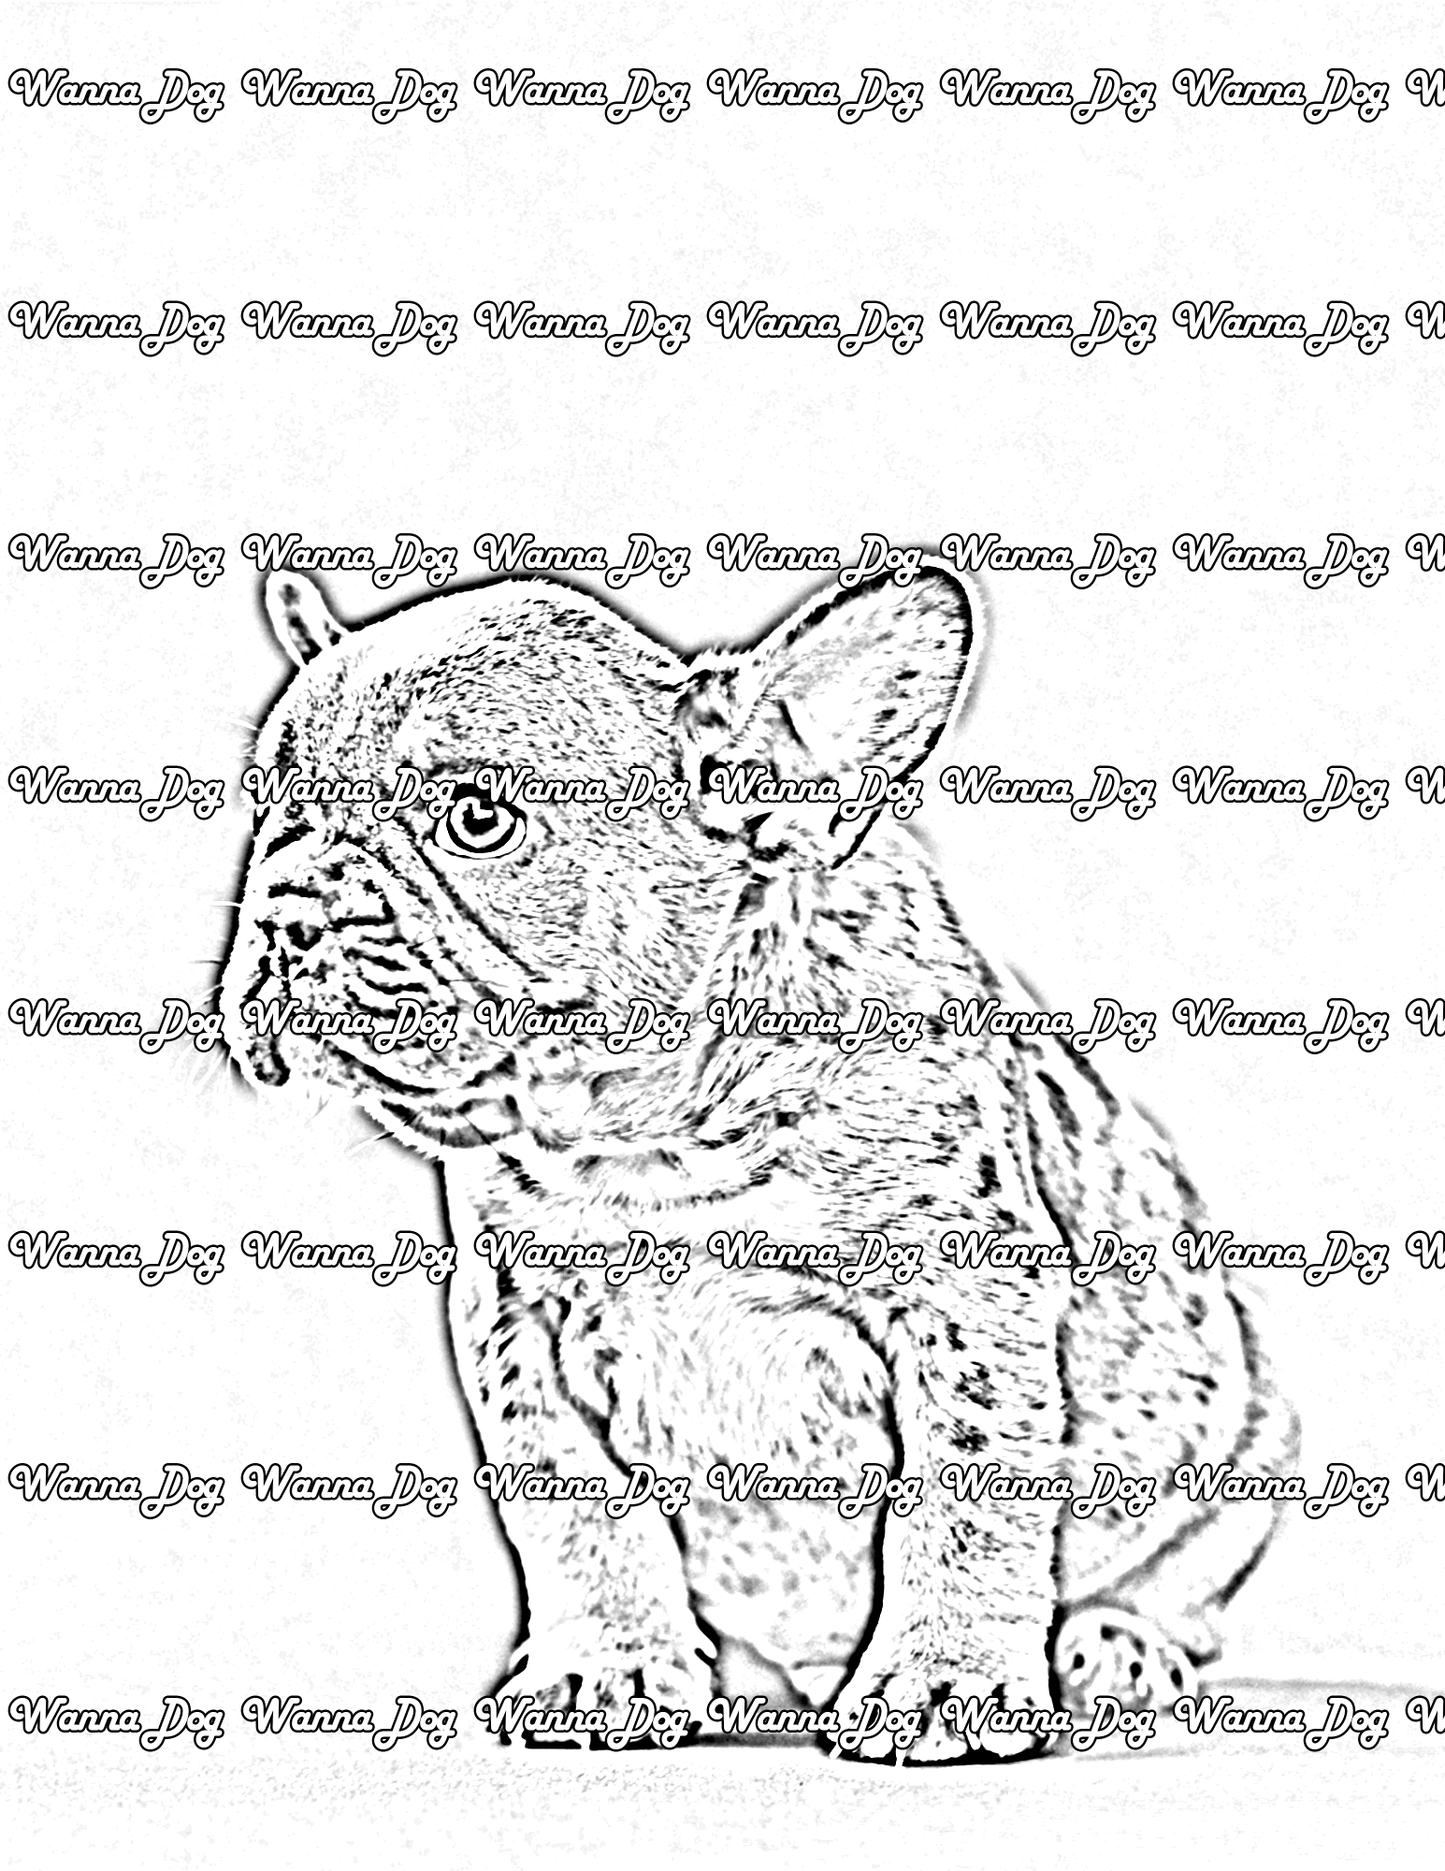 French Bulldog Puppy Coloring Page of a French Bulldog Puppy looking away from the camera